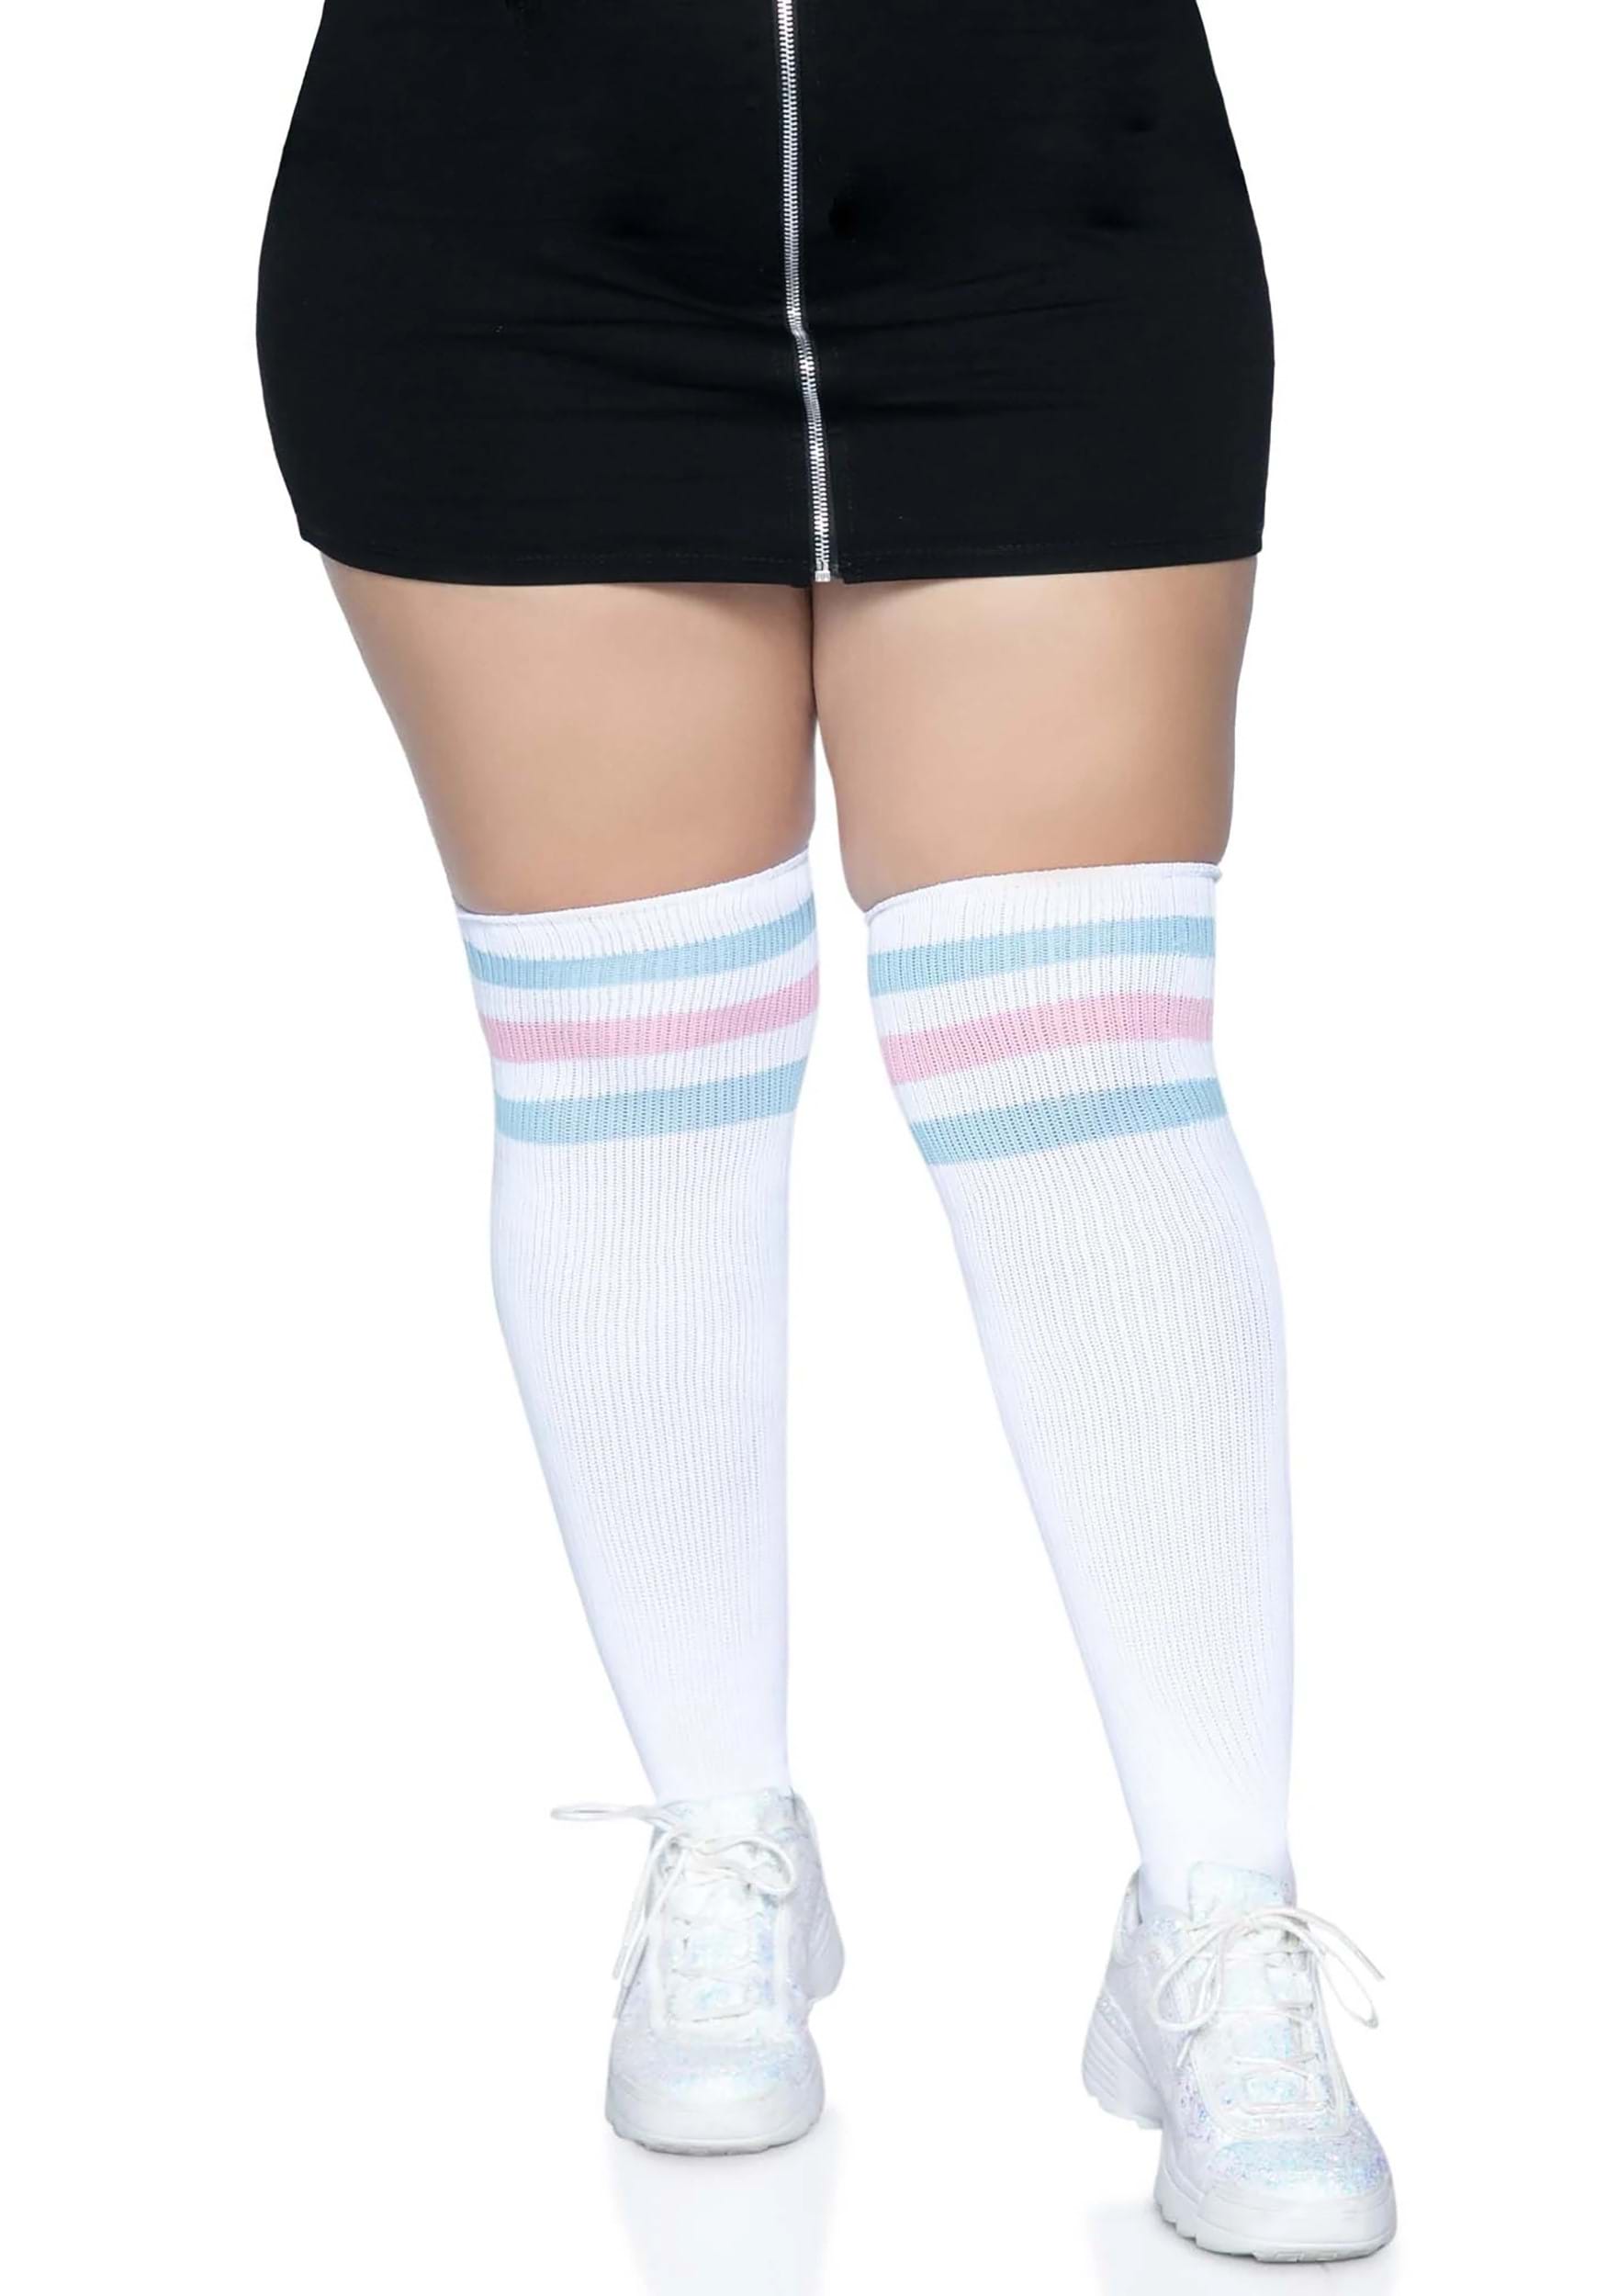 Plus White Socks with Pink and Blue Stripes for Women